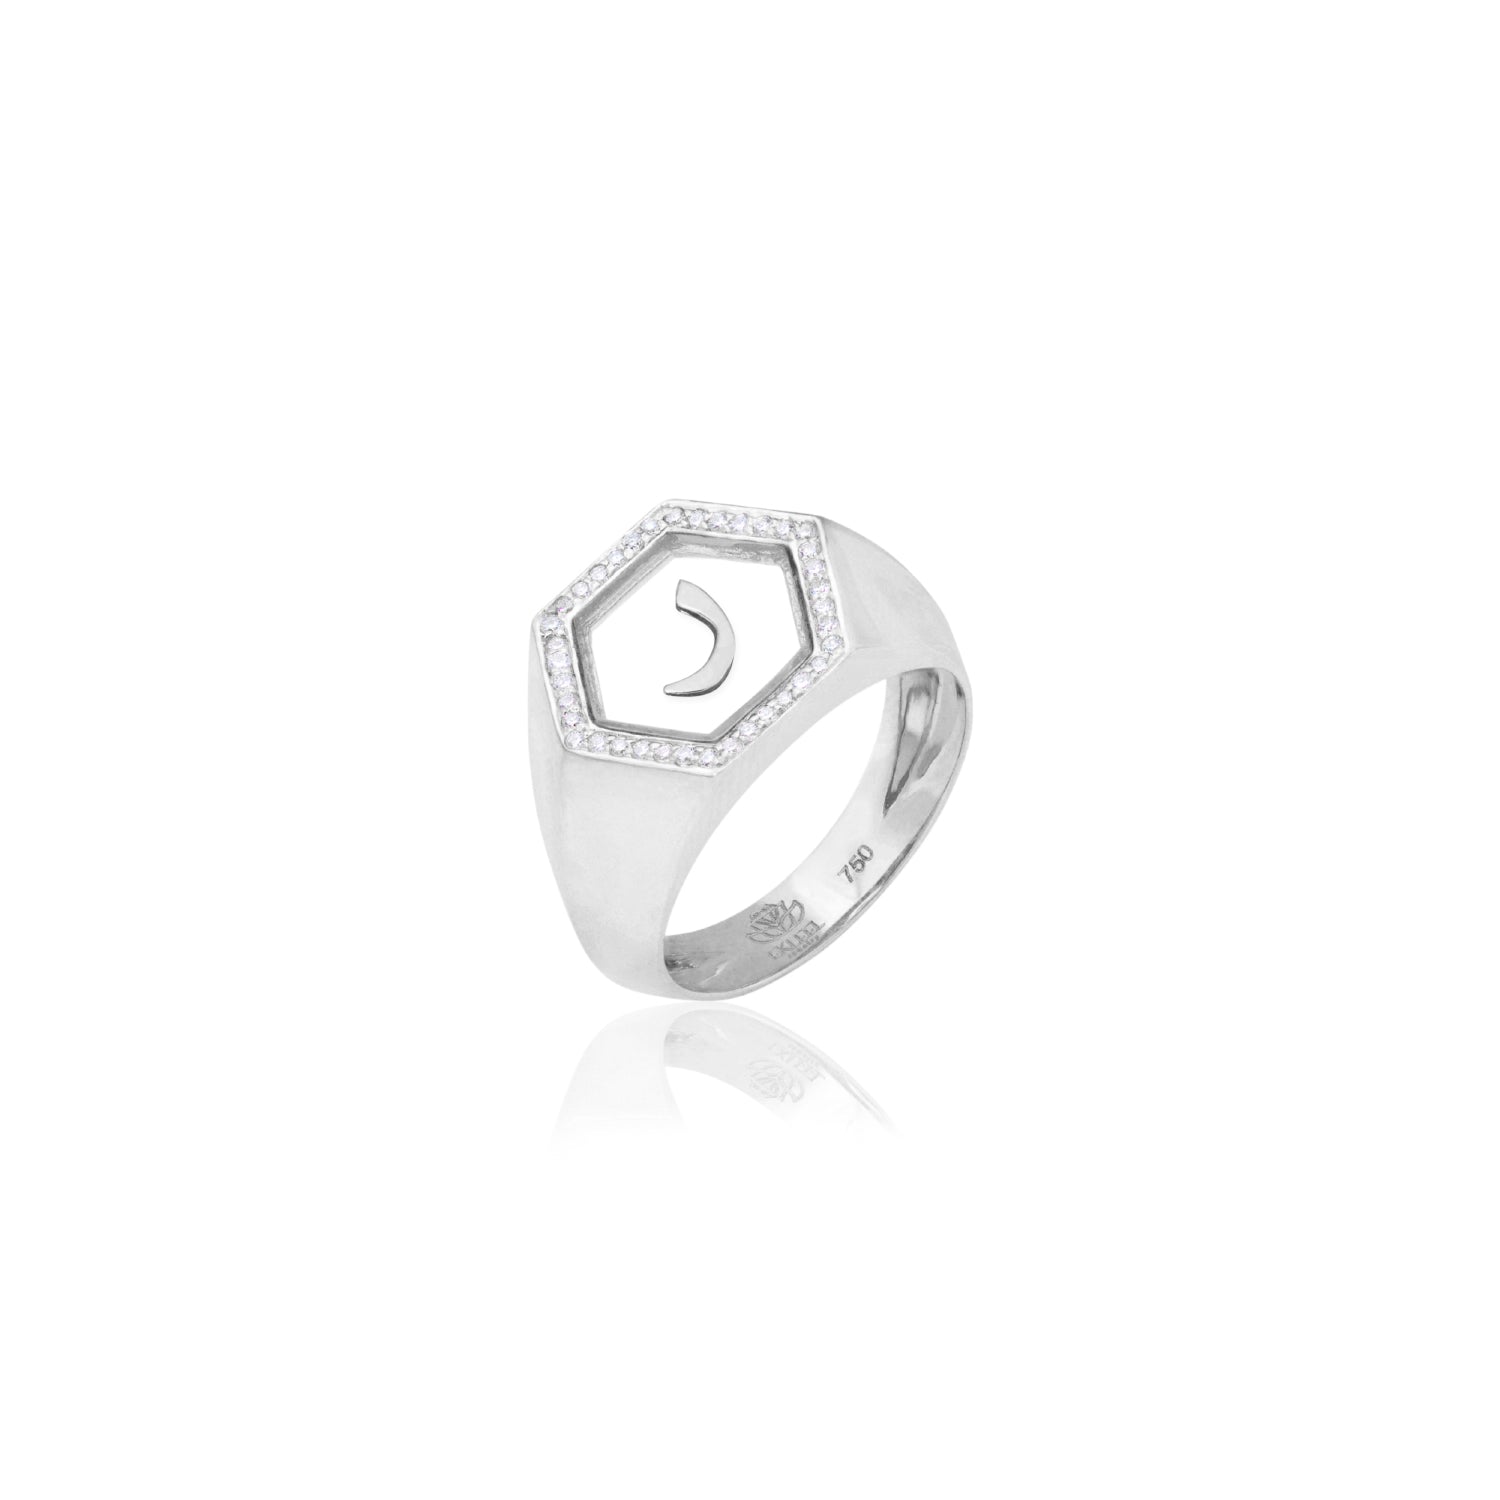 Qamoos 2.0 Letter ر Plexiglass and Diamond Signet Ring in White Gold